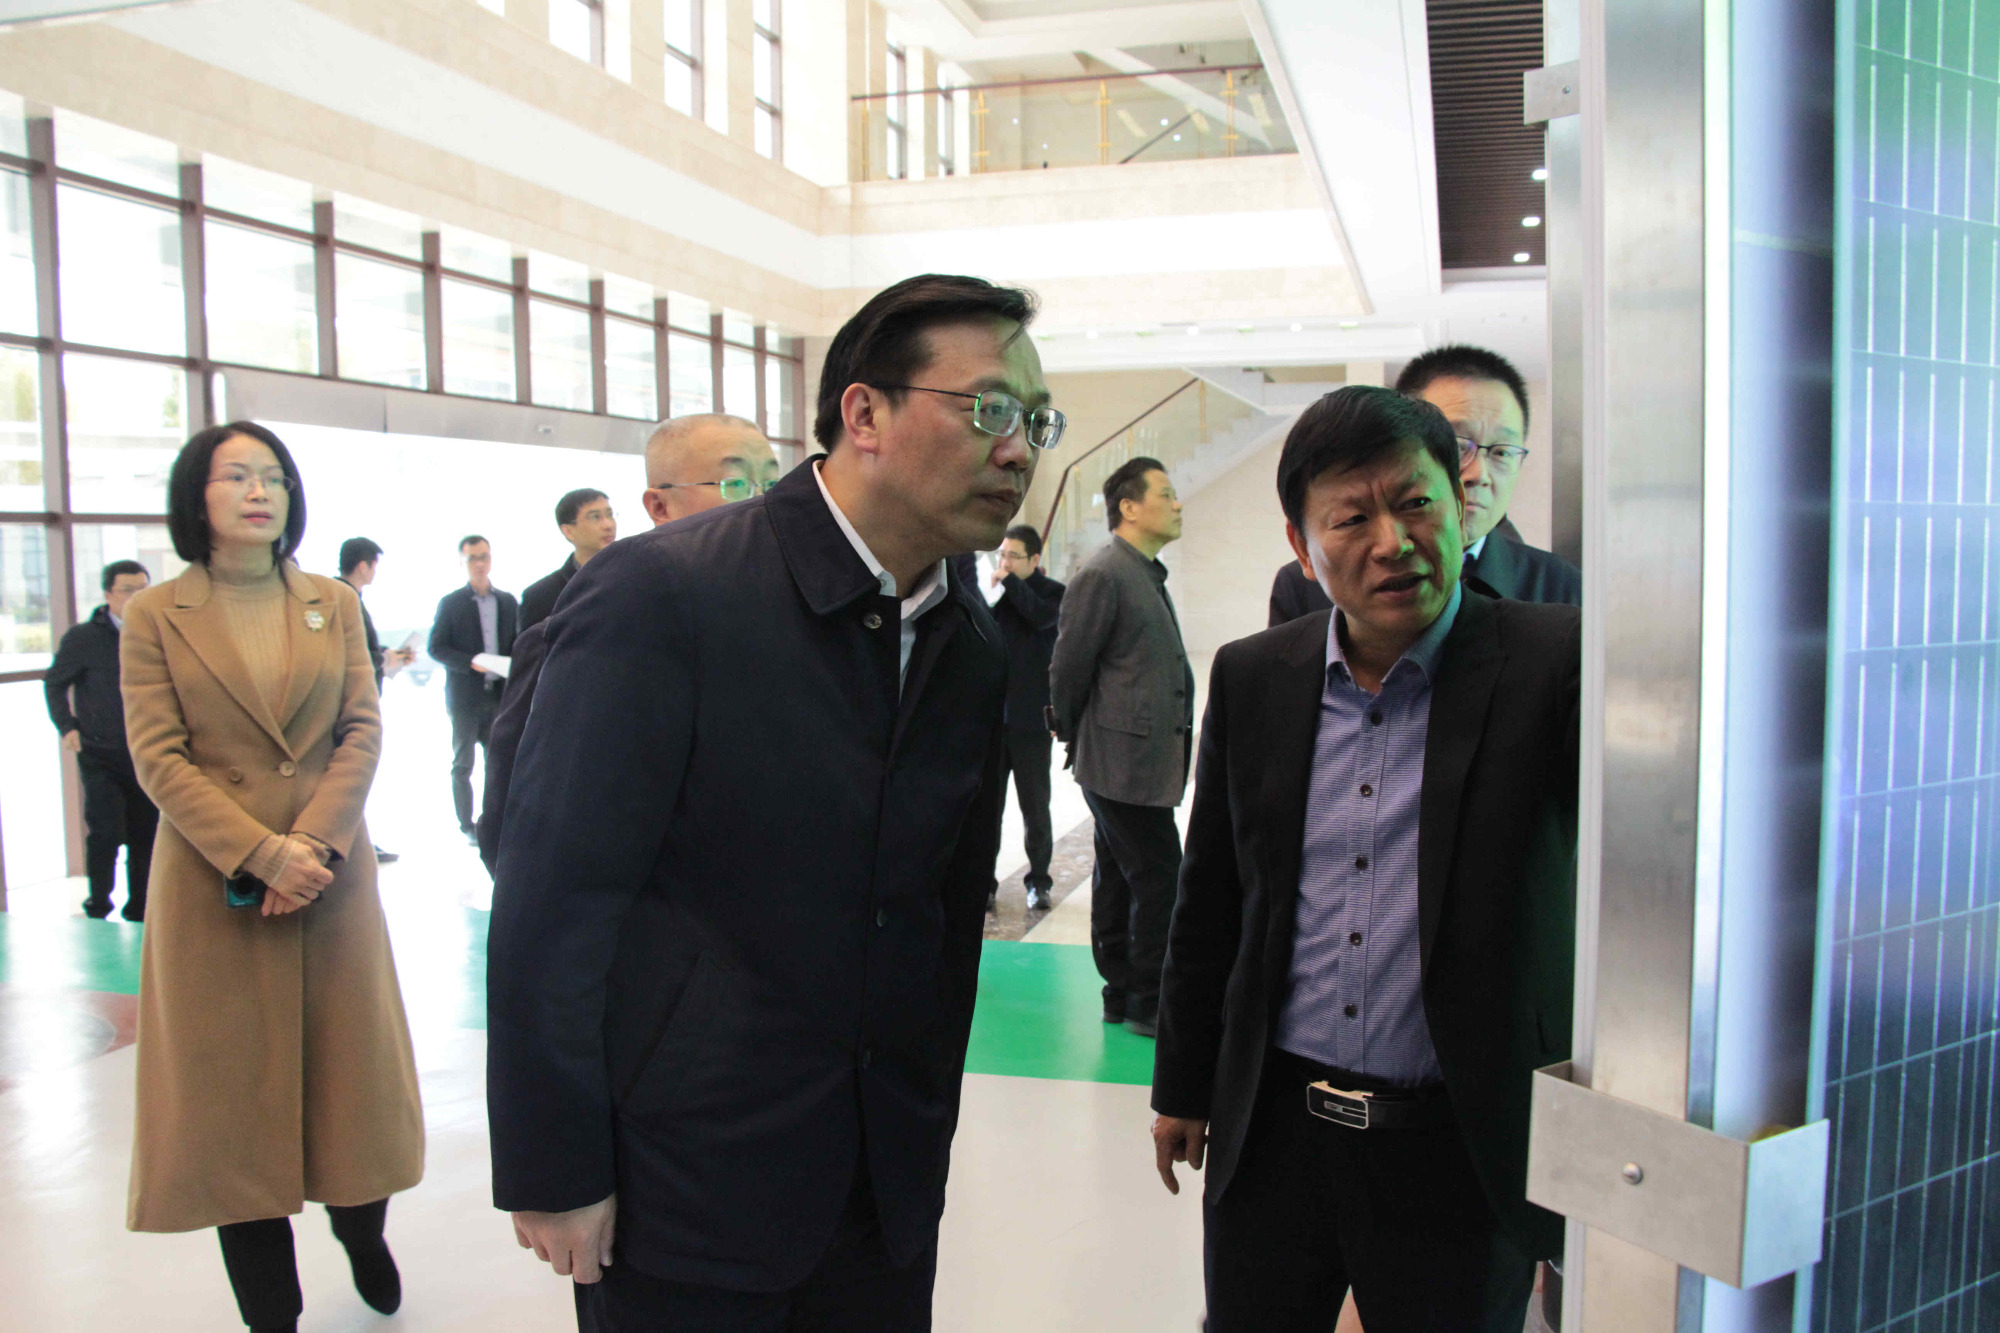 A delegation led by Mayor Jia Sheng of Yangzhong City visited Green Energy Power